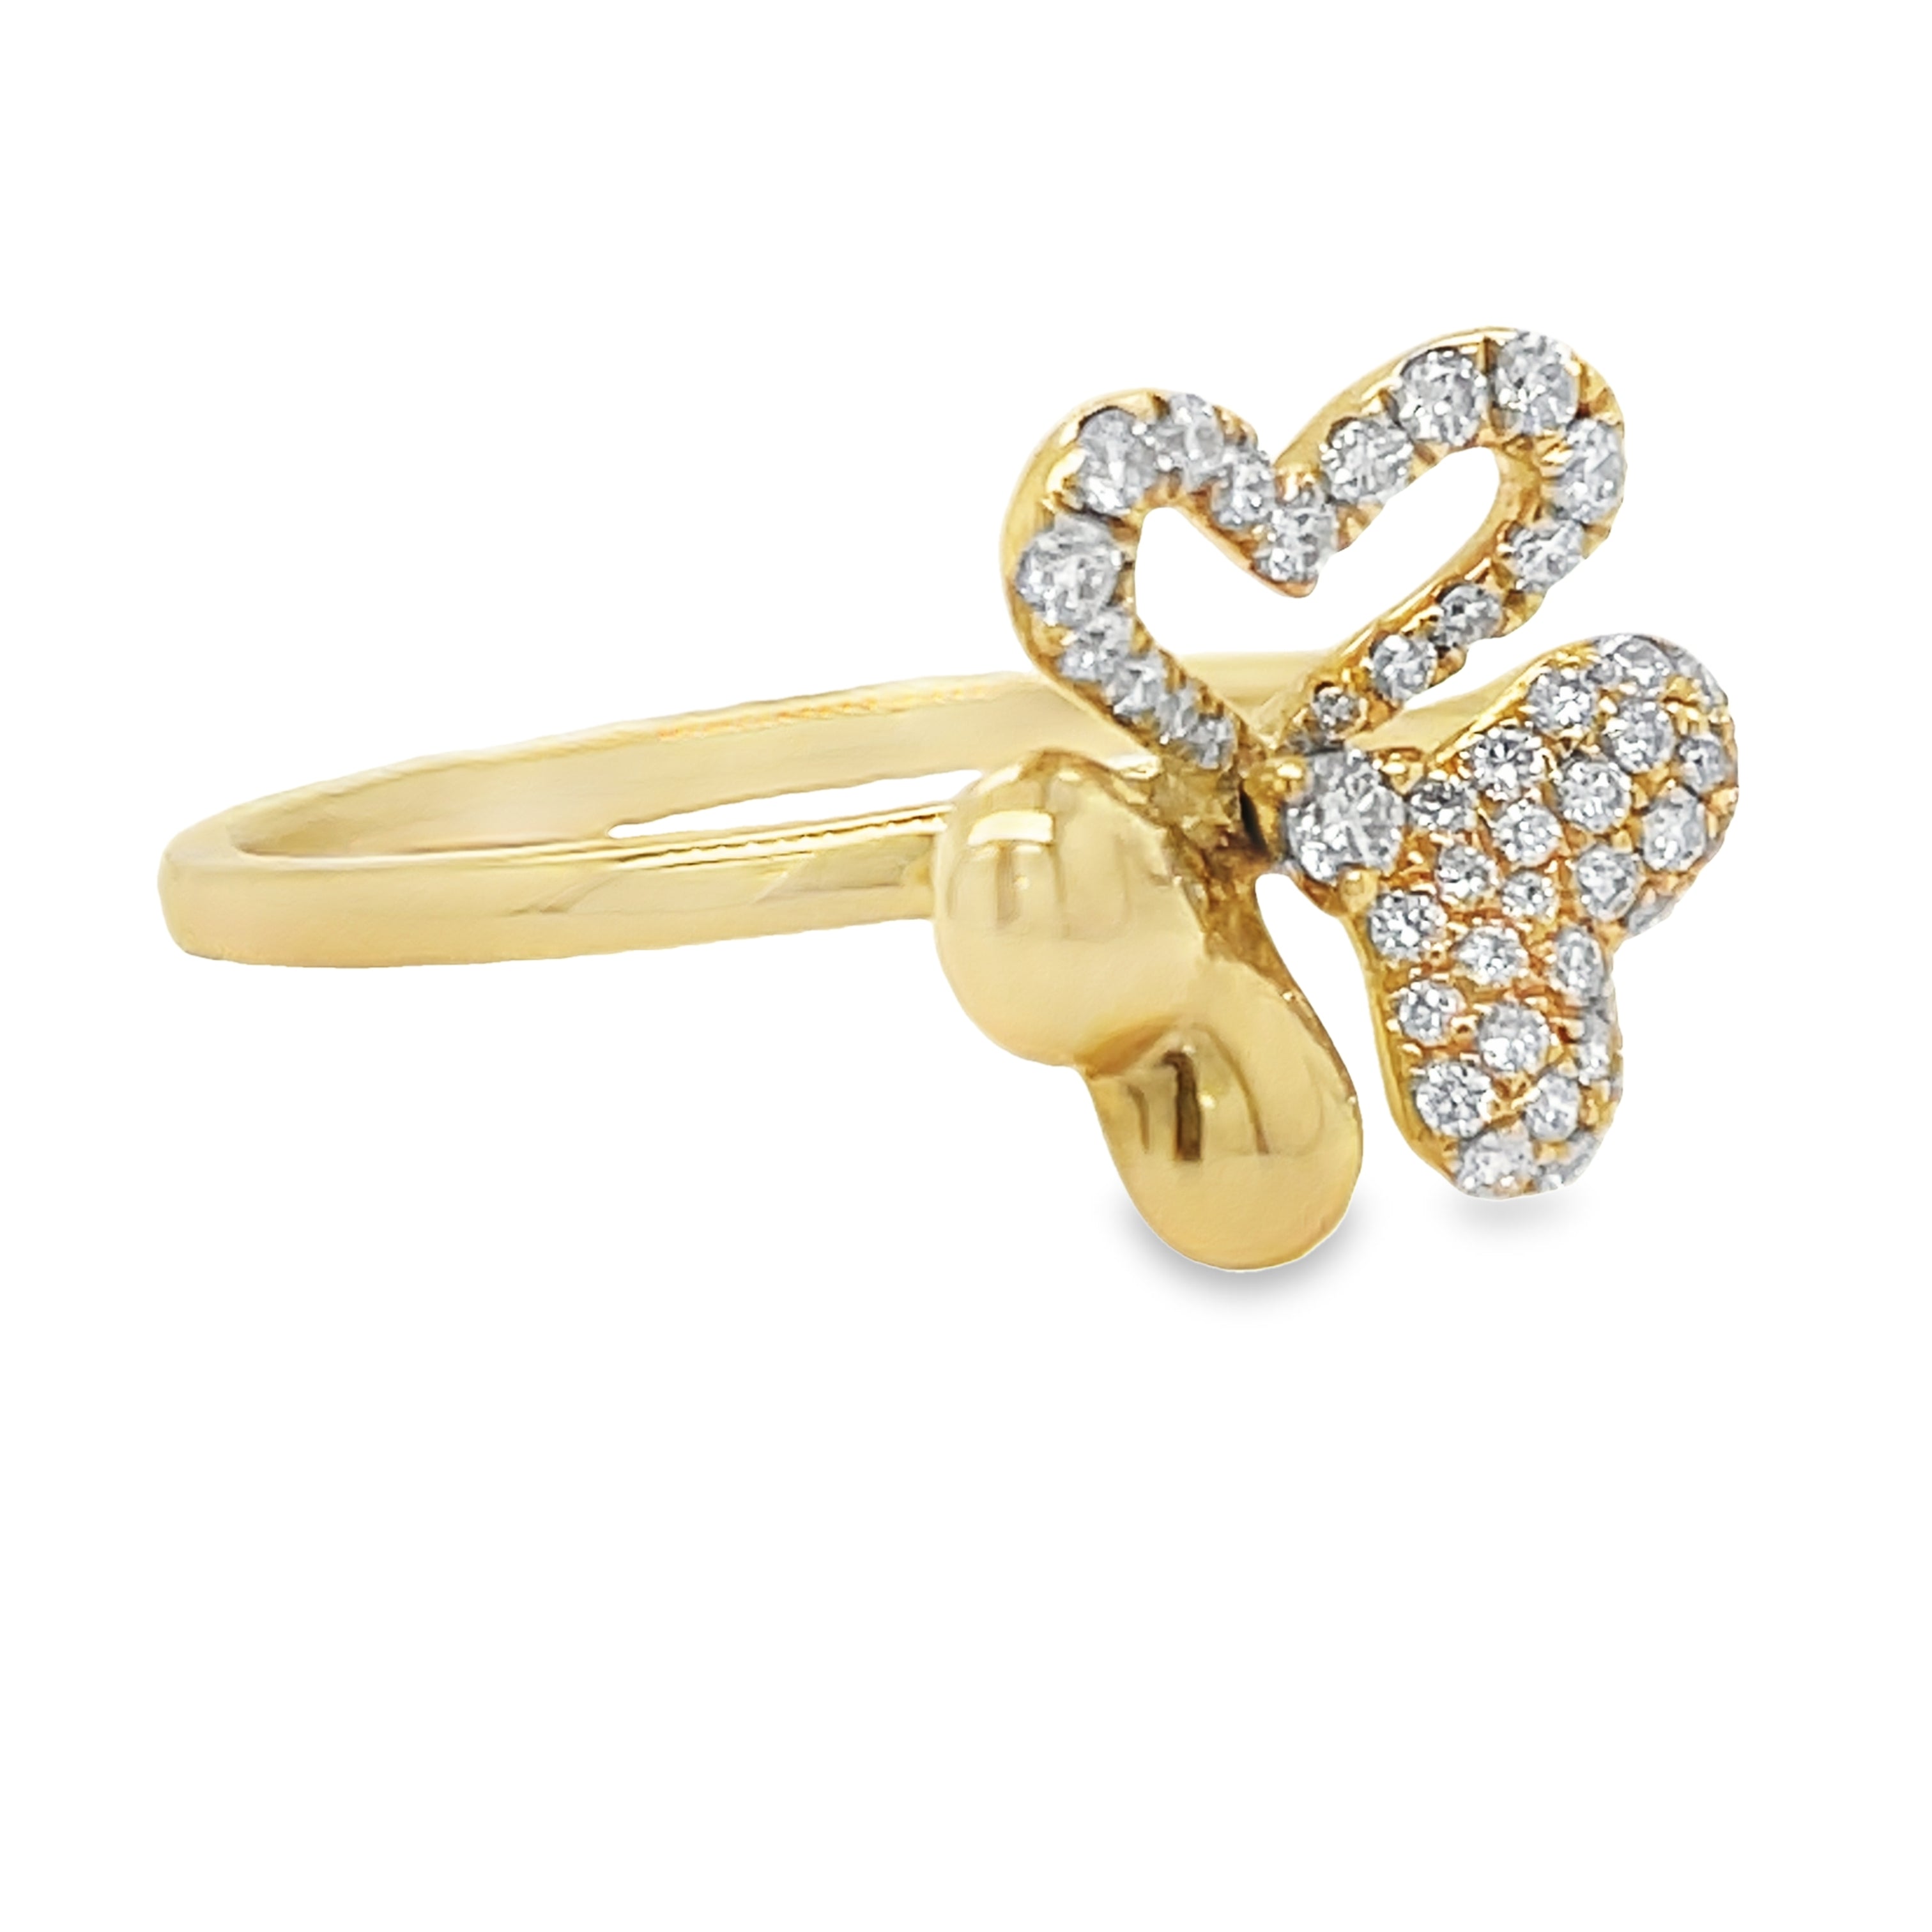 Expertly crafted in 18k yellow gold, this stunning diamond flower ring features 0.27 carats of round, sparkling diamonds. The 11.50 mm size makes it a statement piece that will add elegance and sophistication to any outfit. A timeless addition to any jewelry collection.